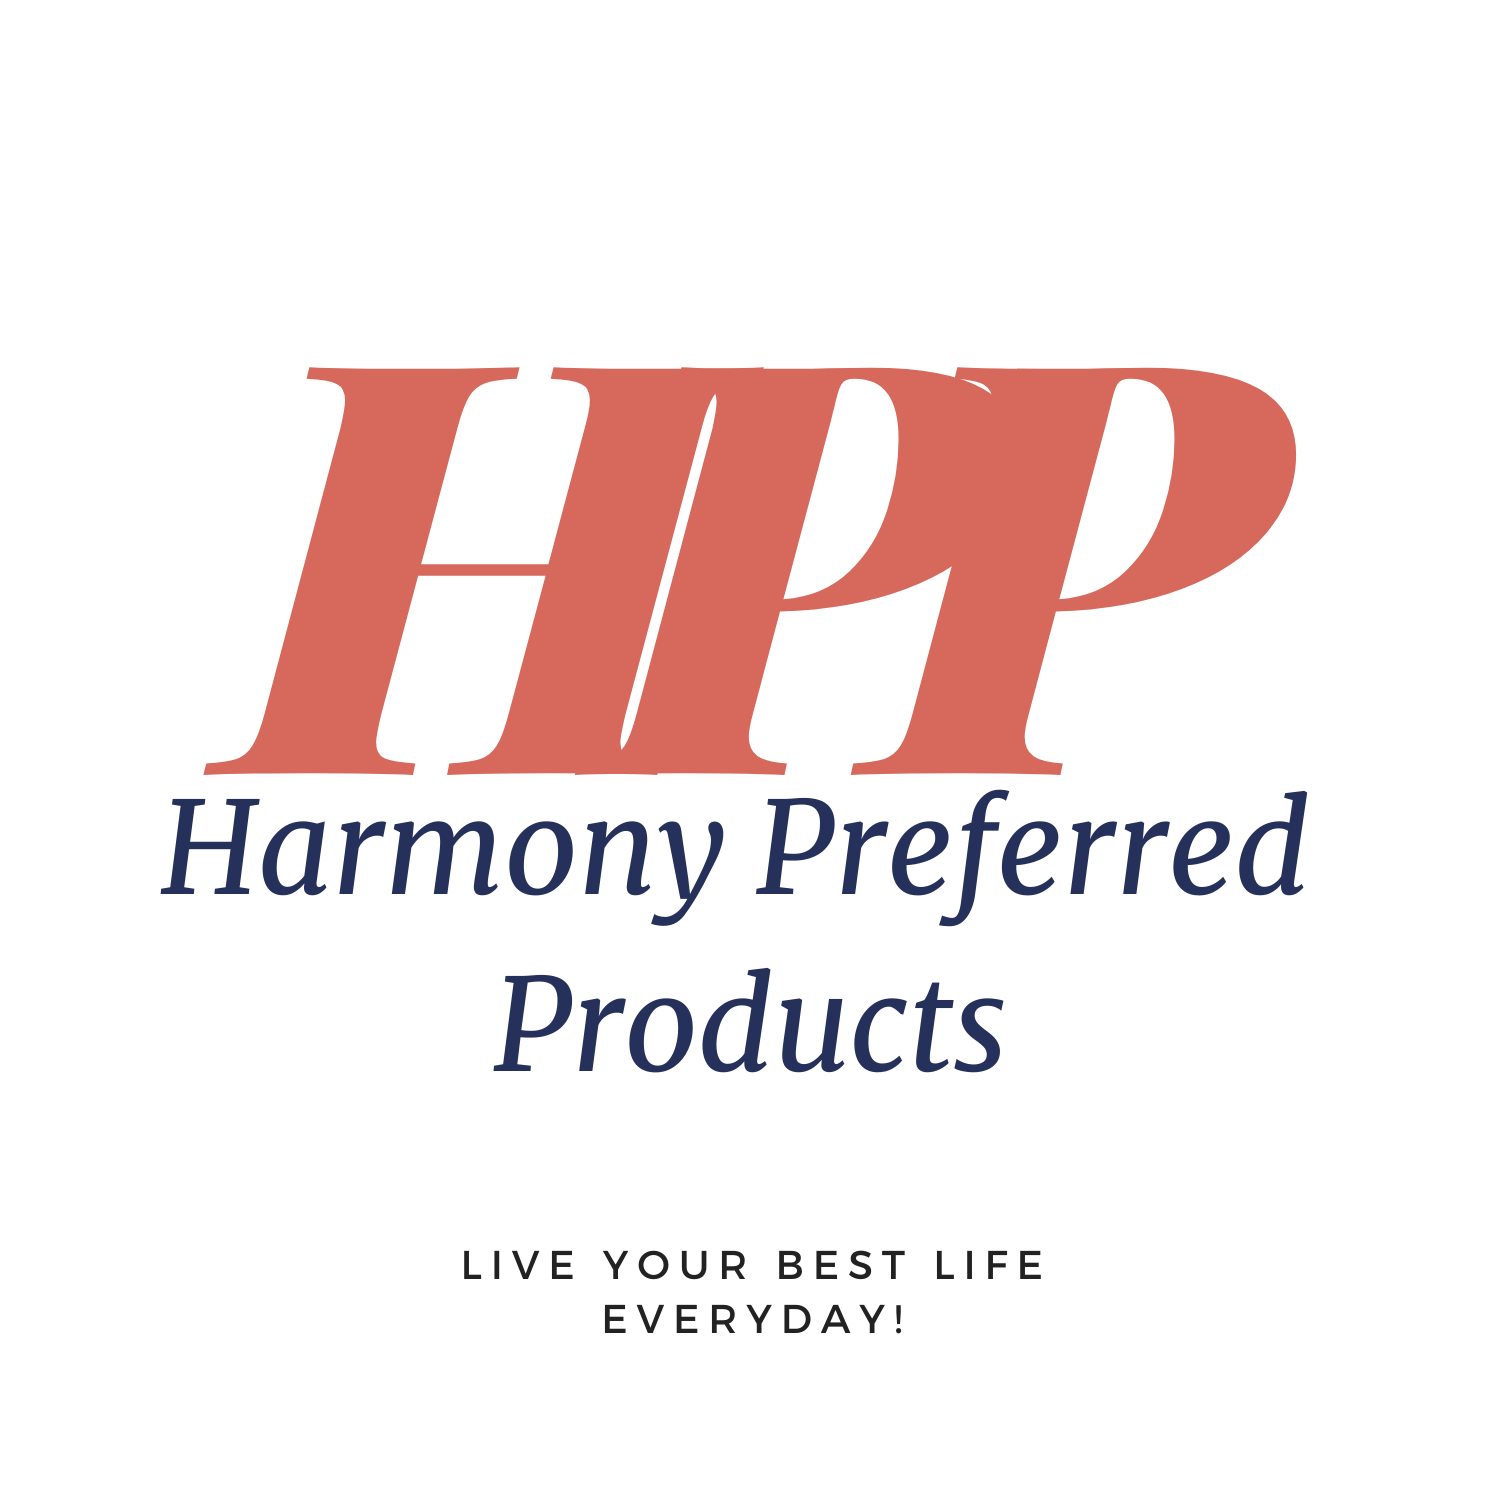 Harmony Preferred Products Is A Proud Sponsor Of The Los Angeles Ballet And Their 2020 Gala